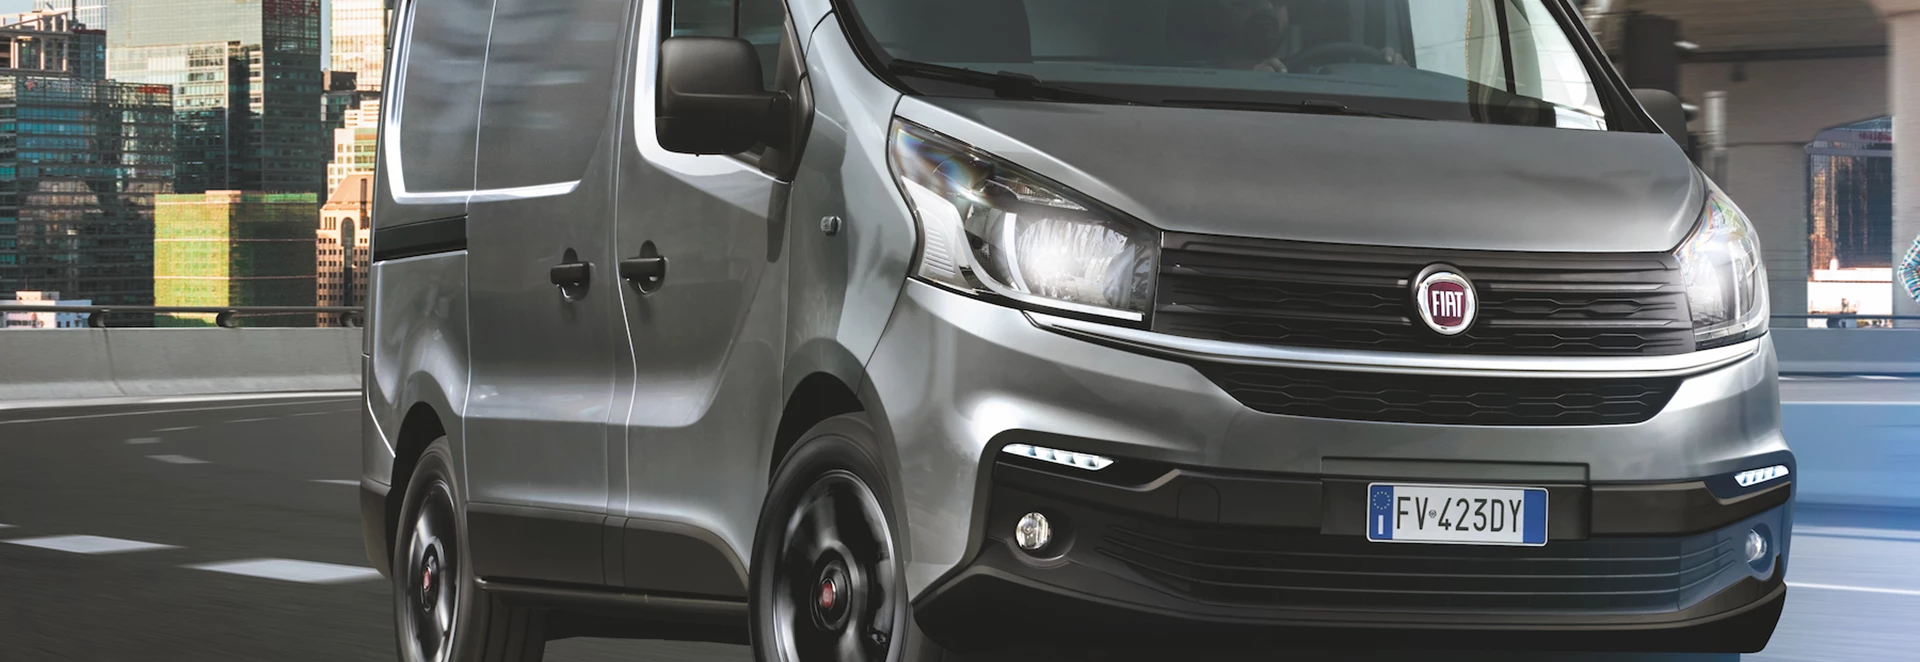 Updated Fiat Talento prices revealed